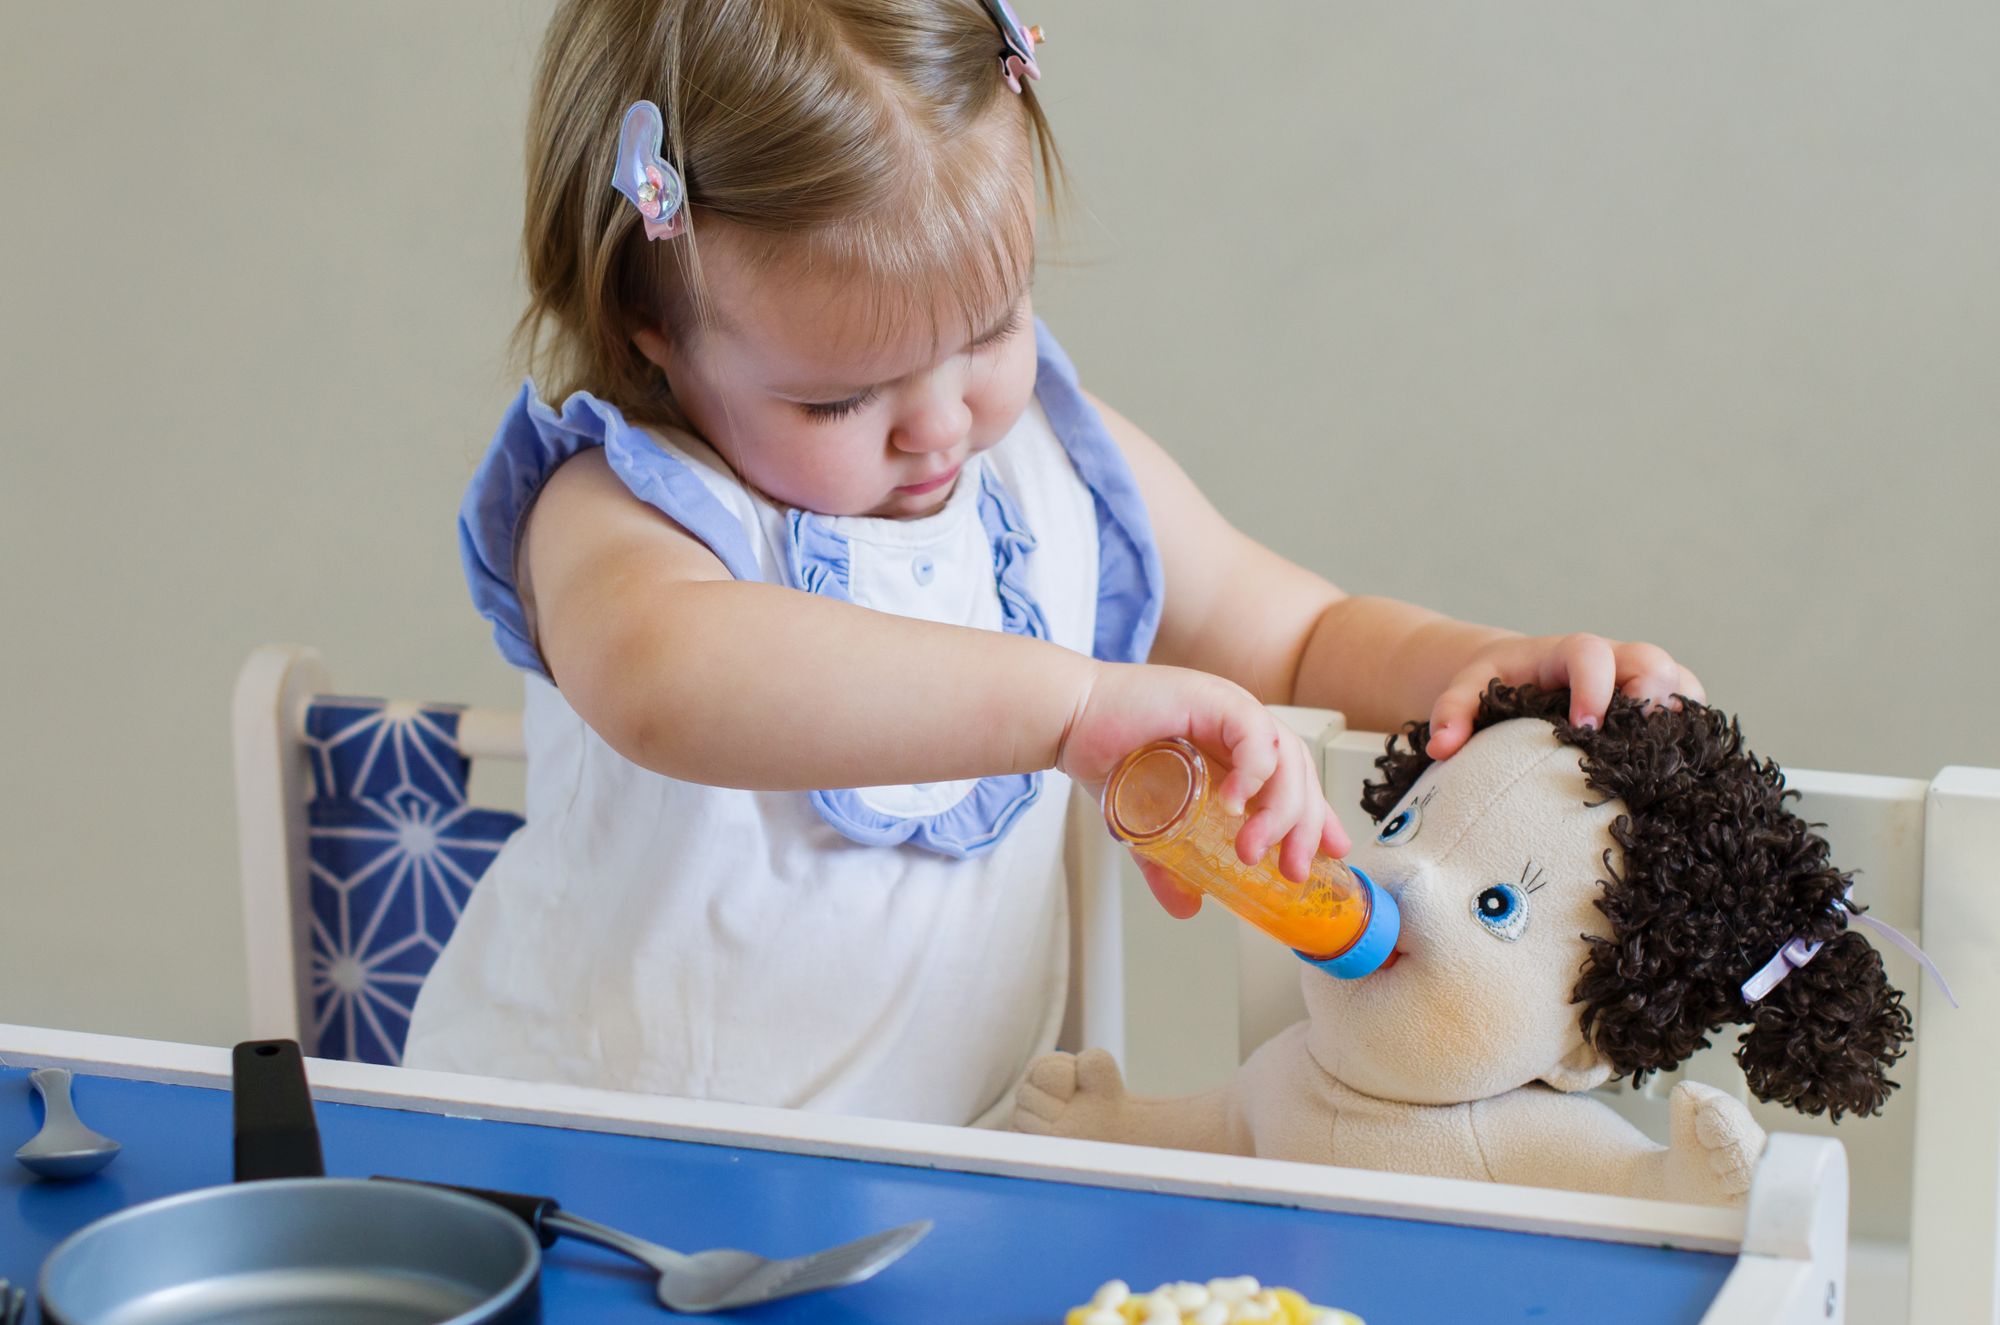 All You Need To Know About Pretend Play